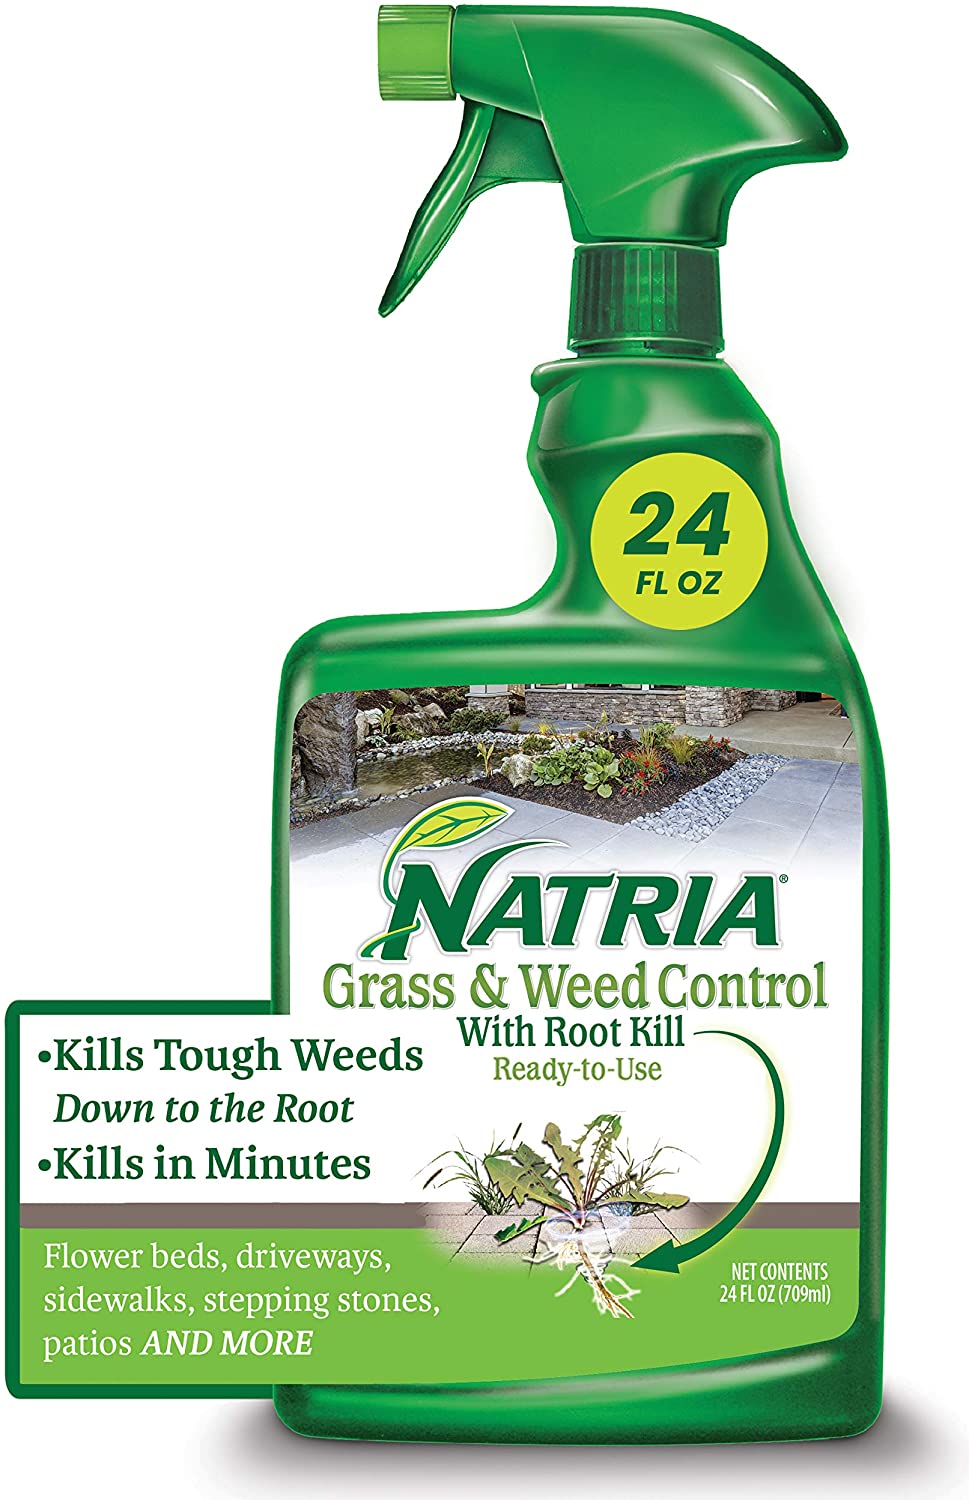 example of natural herbicide